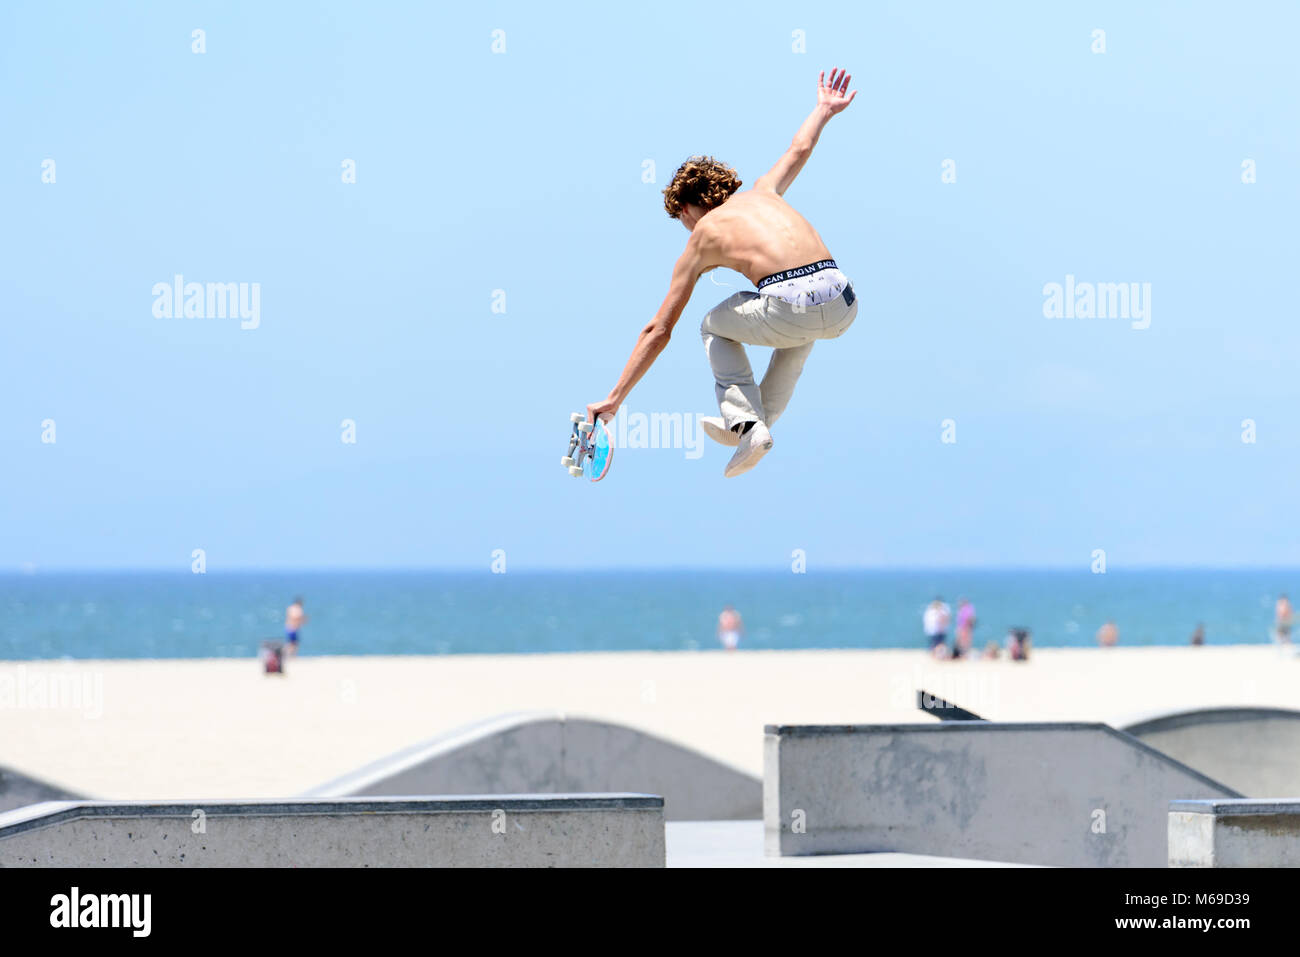 Young skateboarder at the skatepark on world famous Venice Beach Boardwalk one of the most popular attraction of California. Stock Photo